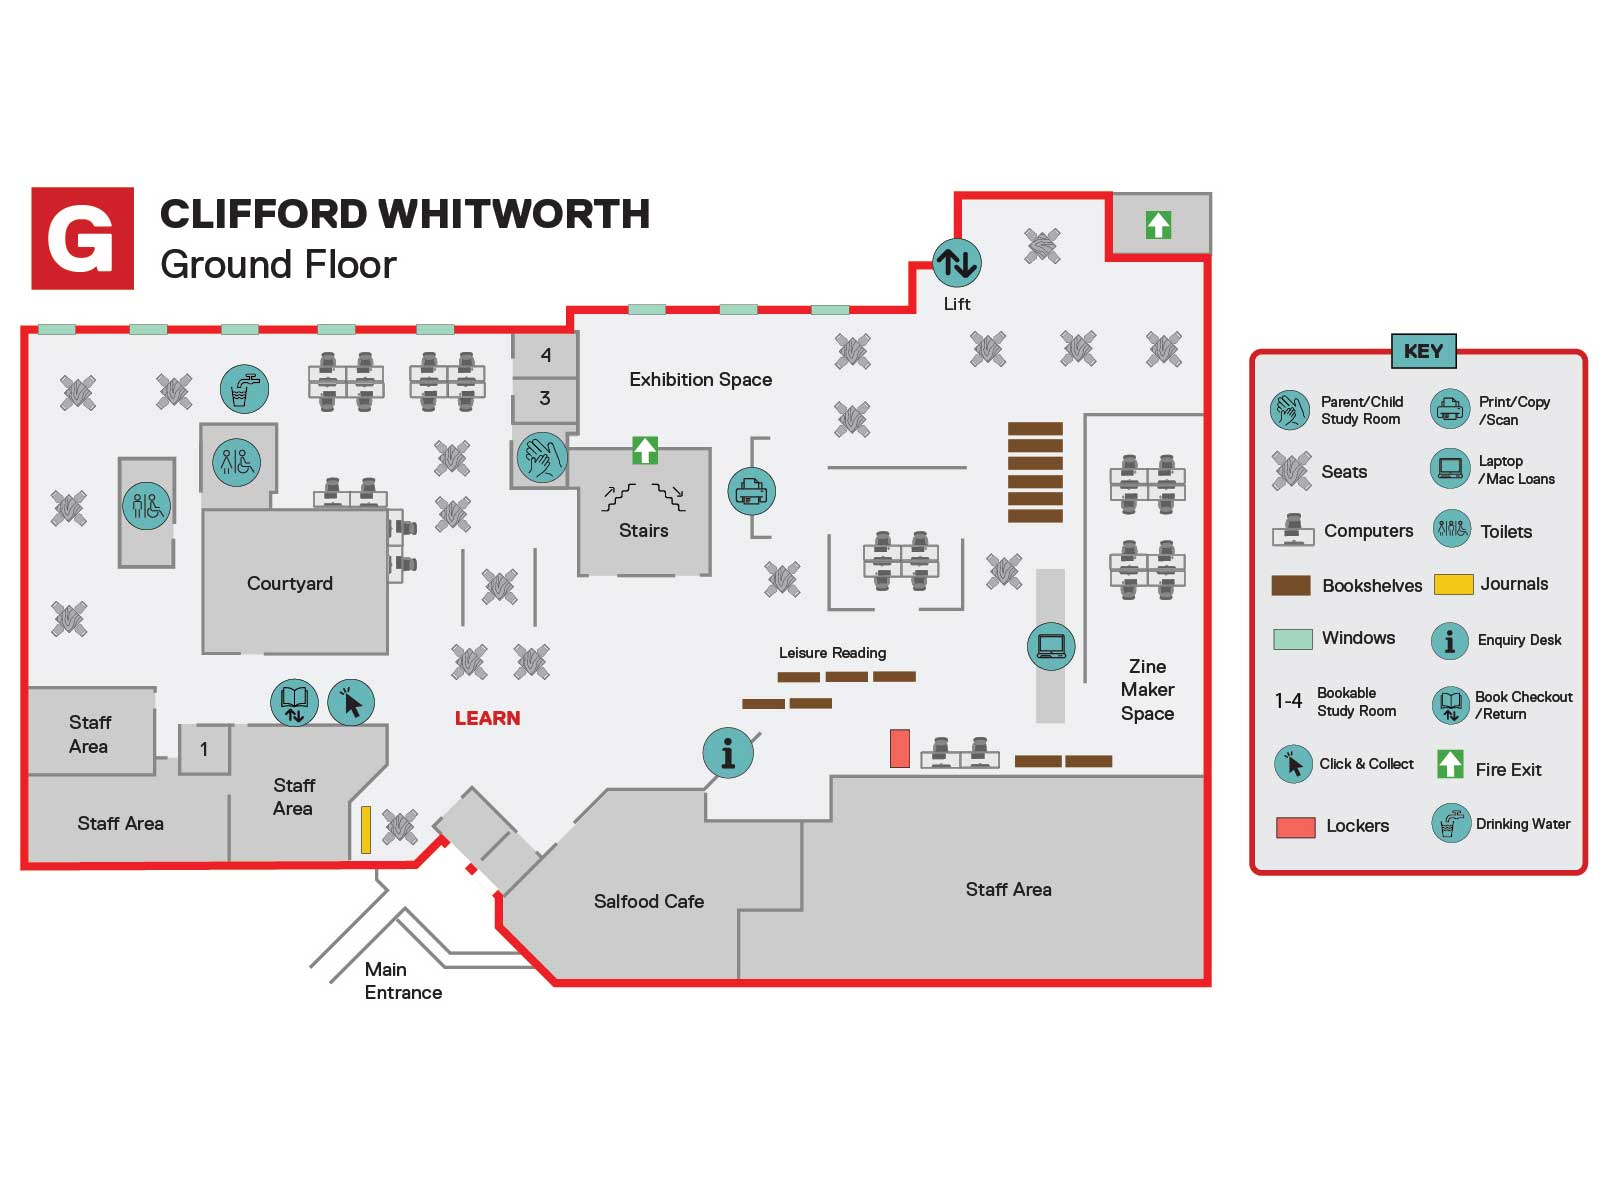 The ground floor of Clifford Whitworth Library